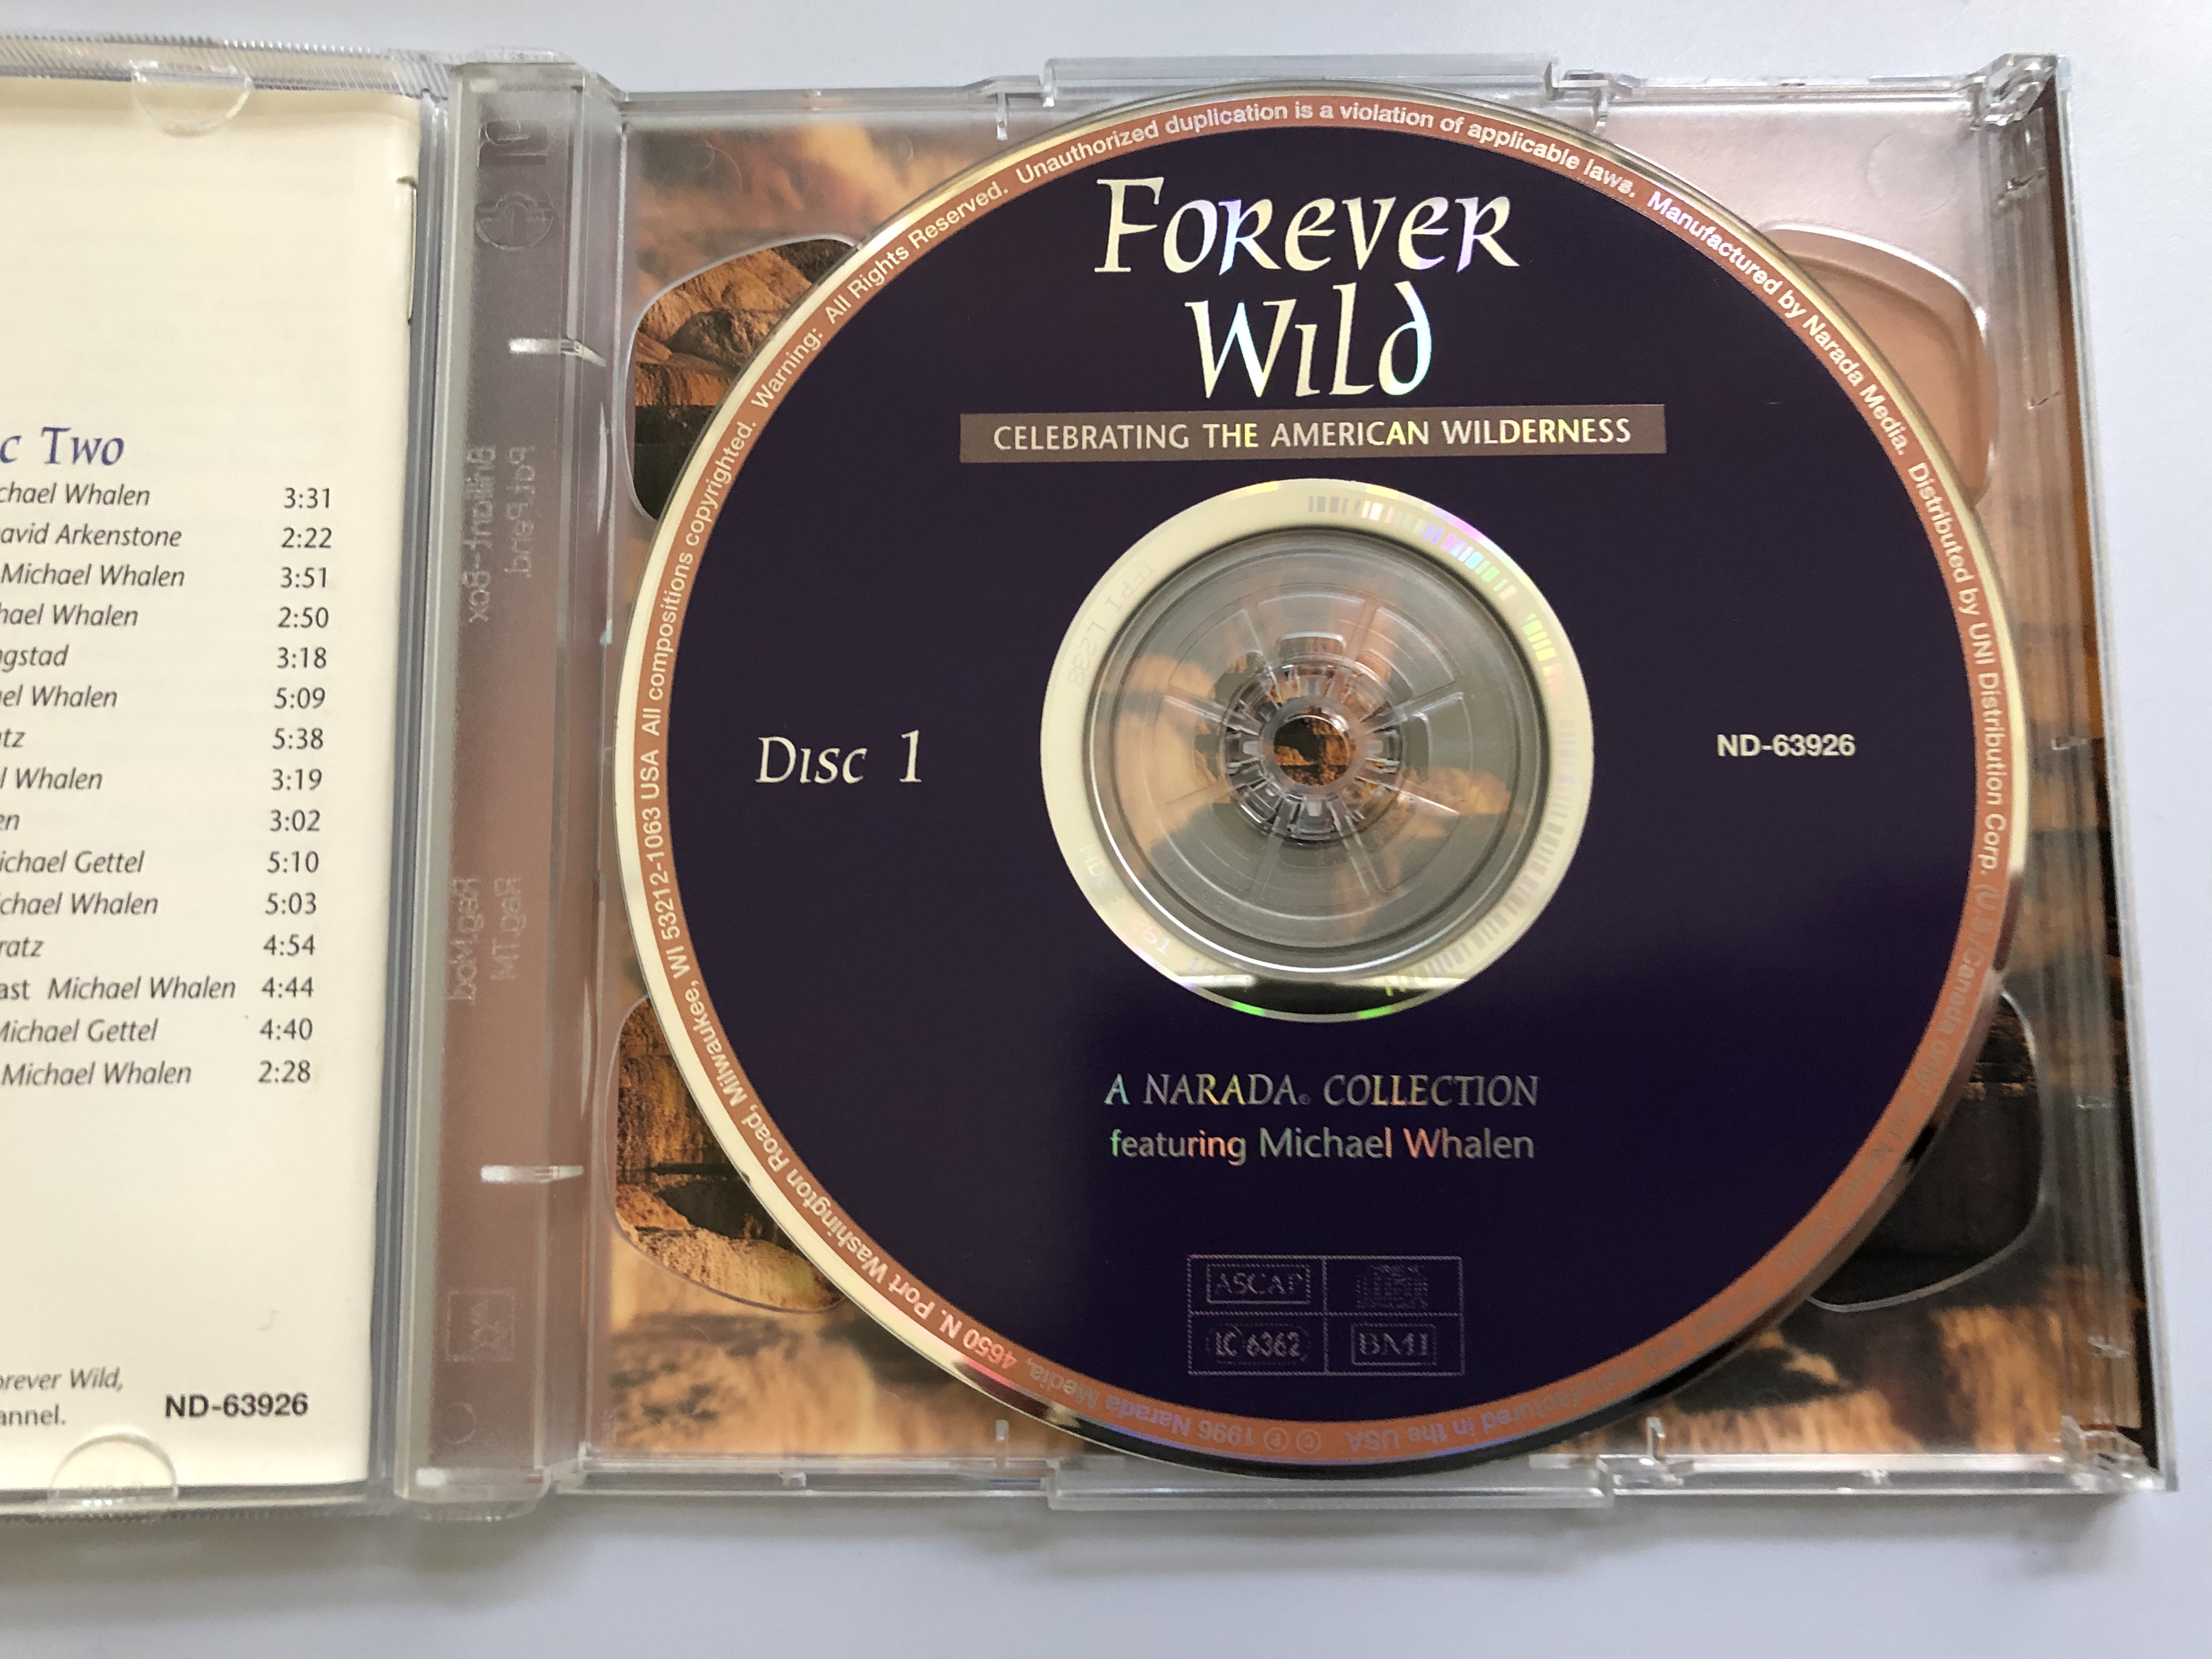 forever-wild-celebrating-the-american-wilderness-a-narada-collection-featuring-michael-whalen-narada-2x-audio-cd-1996-nd-63926-3-.jpg